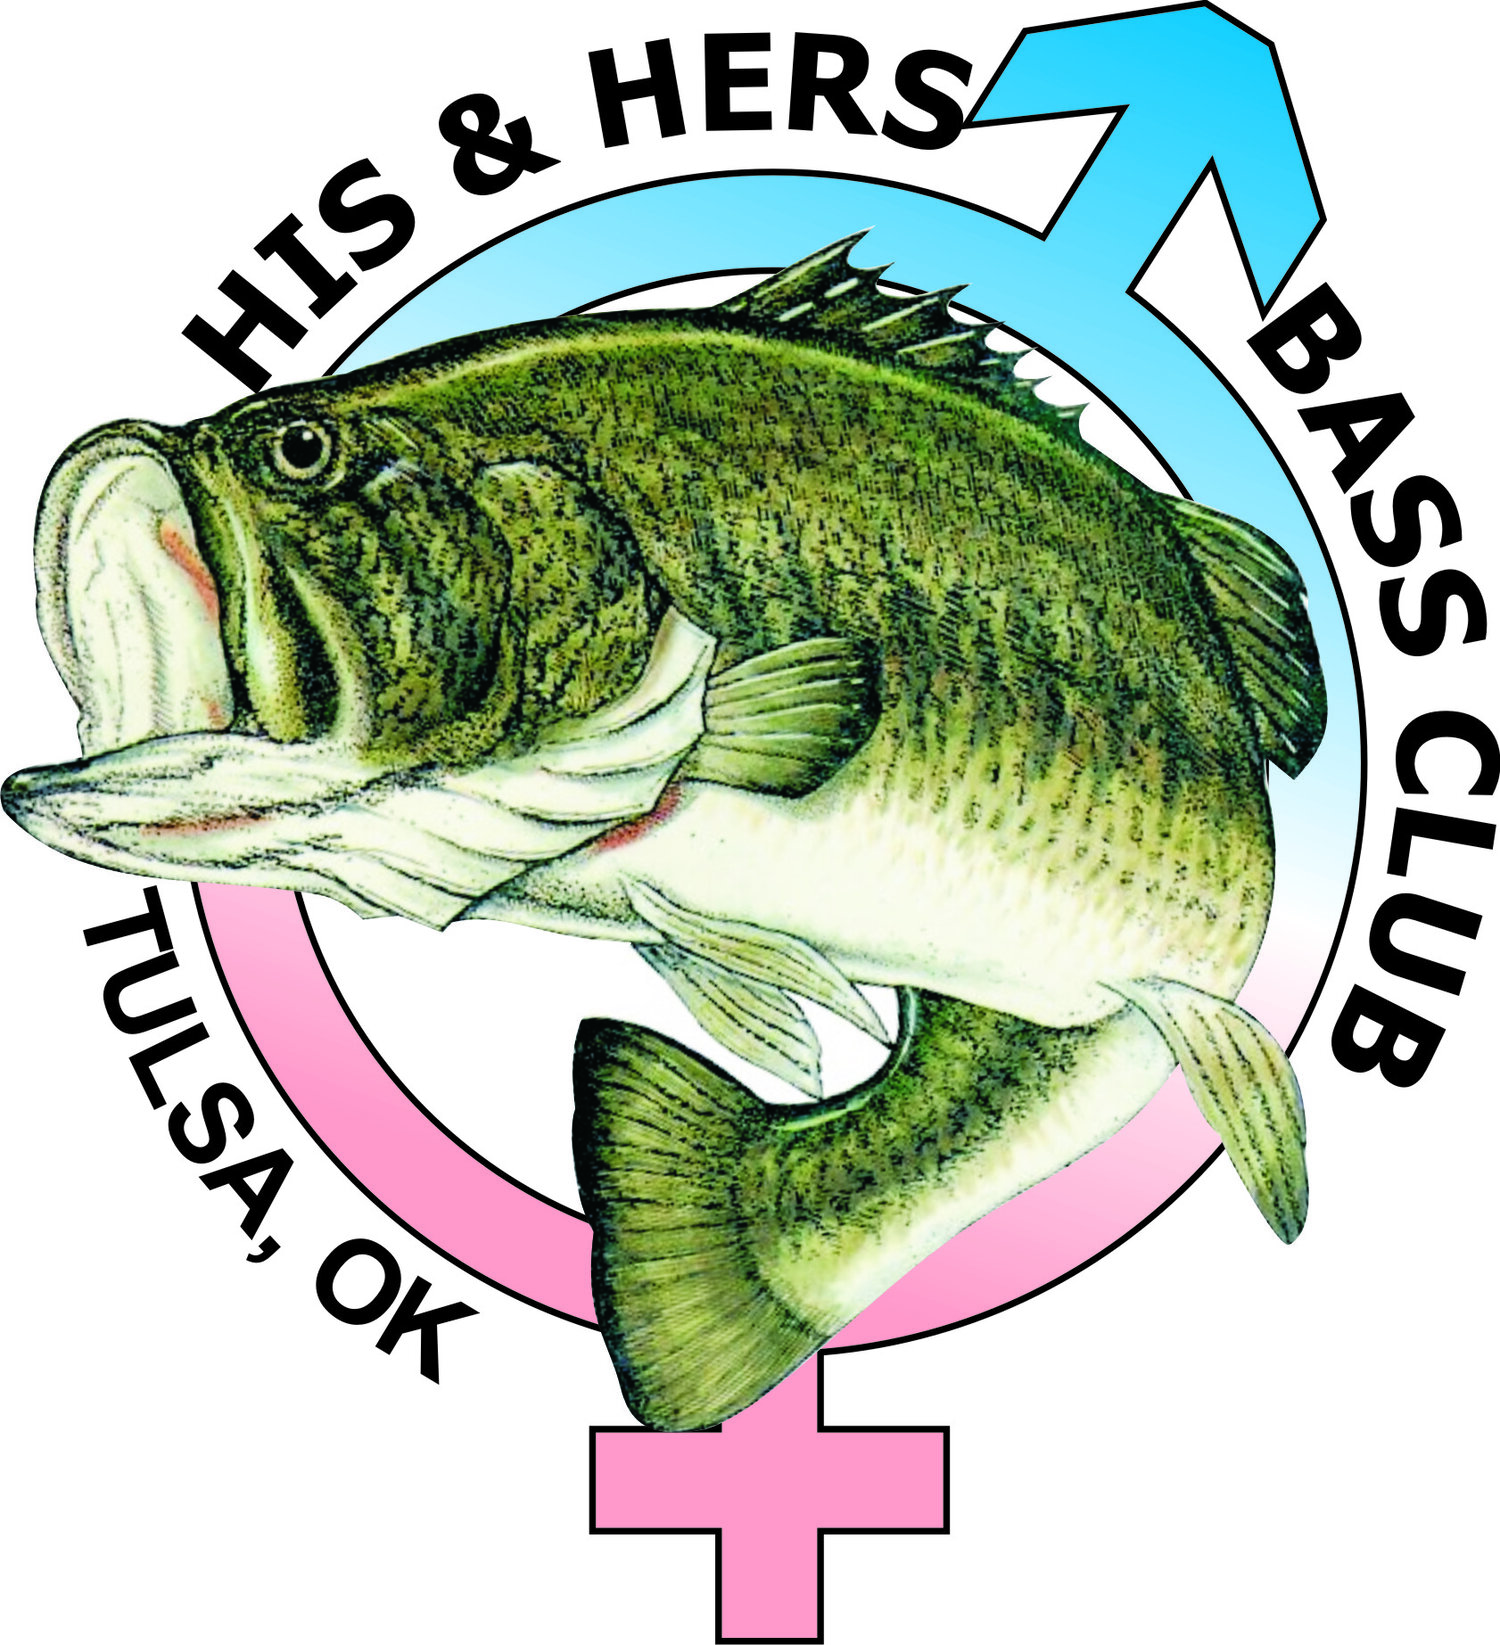 His and Hers Bass Club